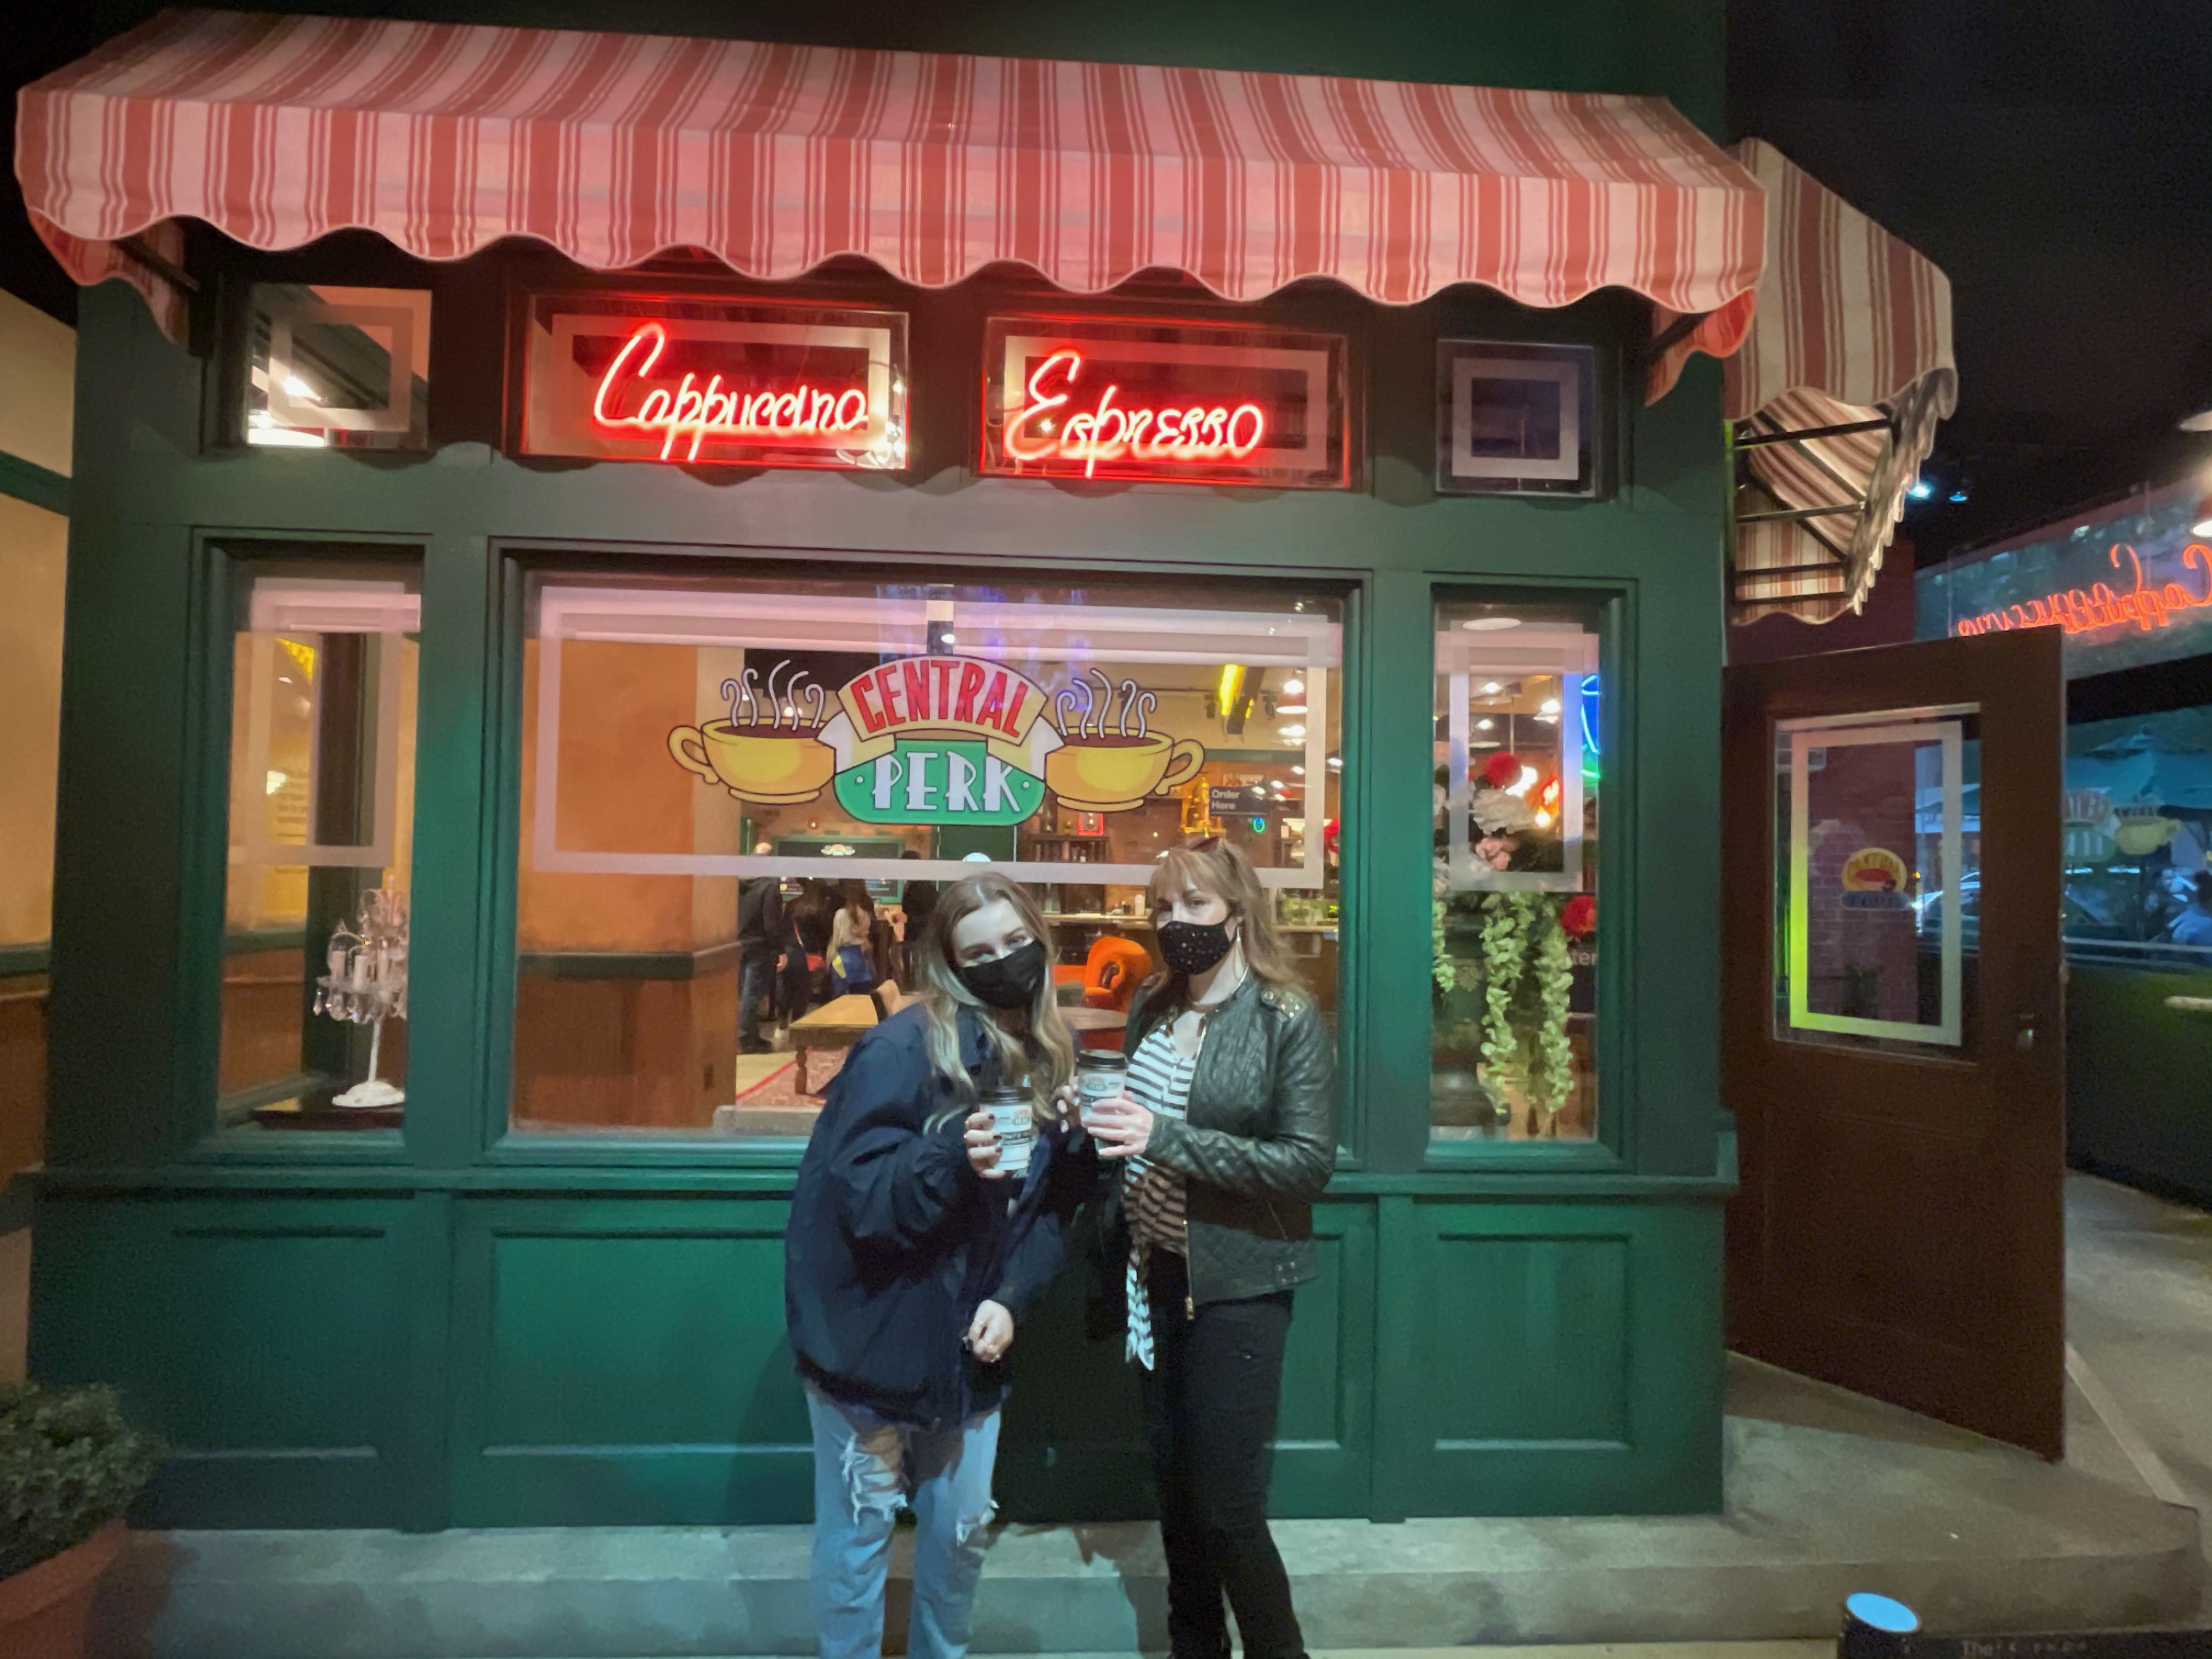 Here's A Look Inside The Amazing New York Central Perk Pop-Up Shop